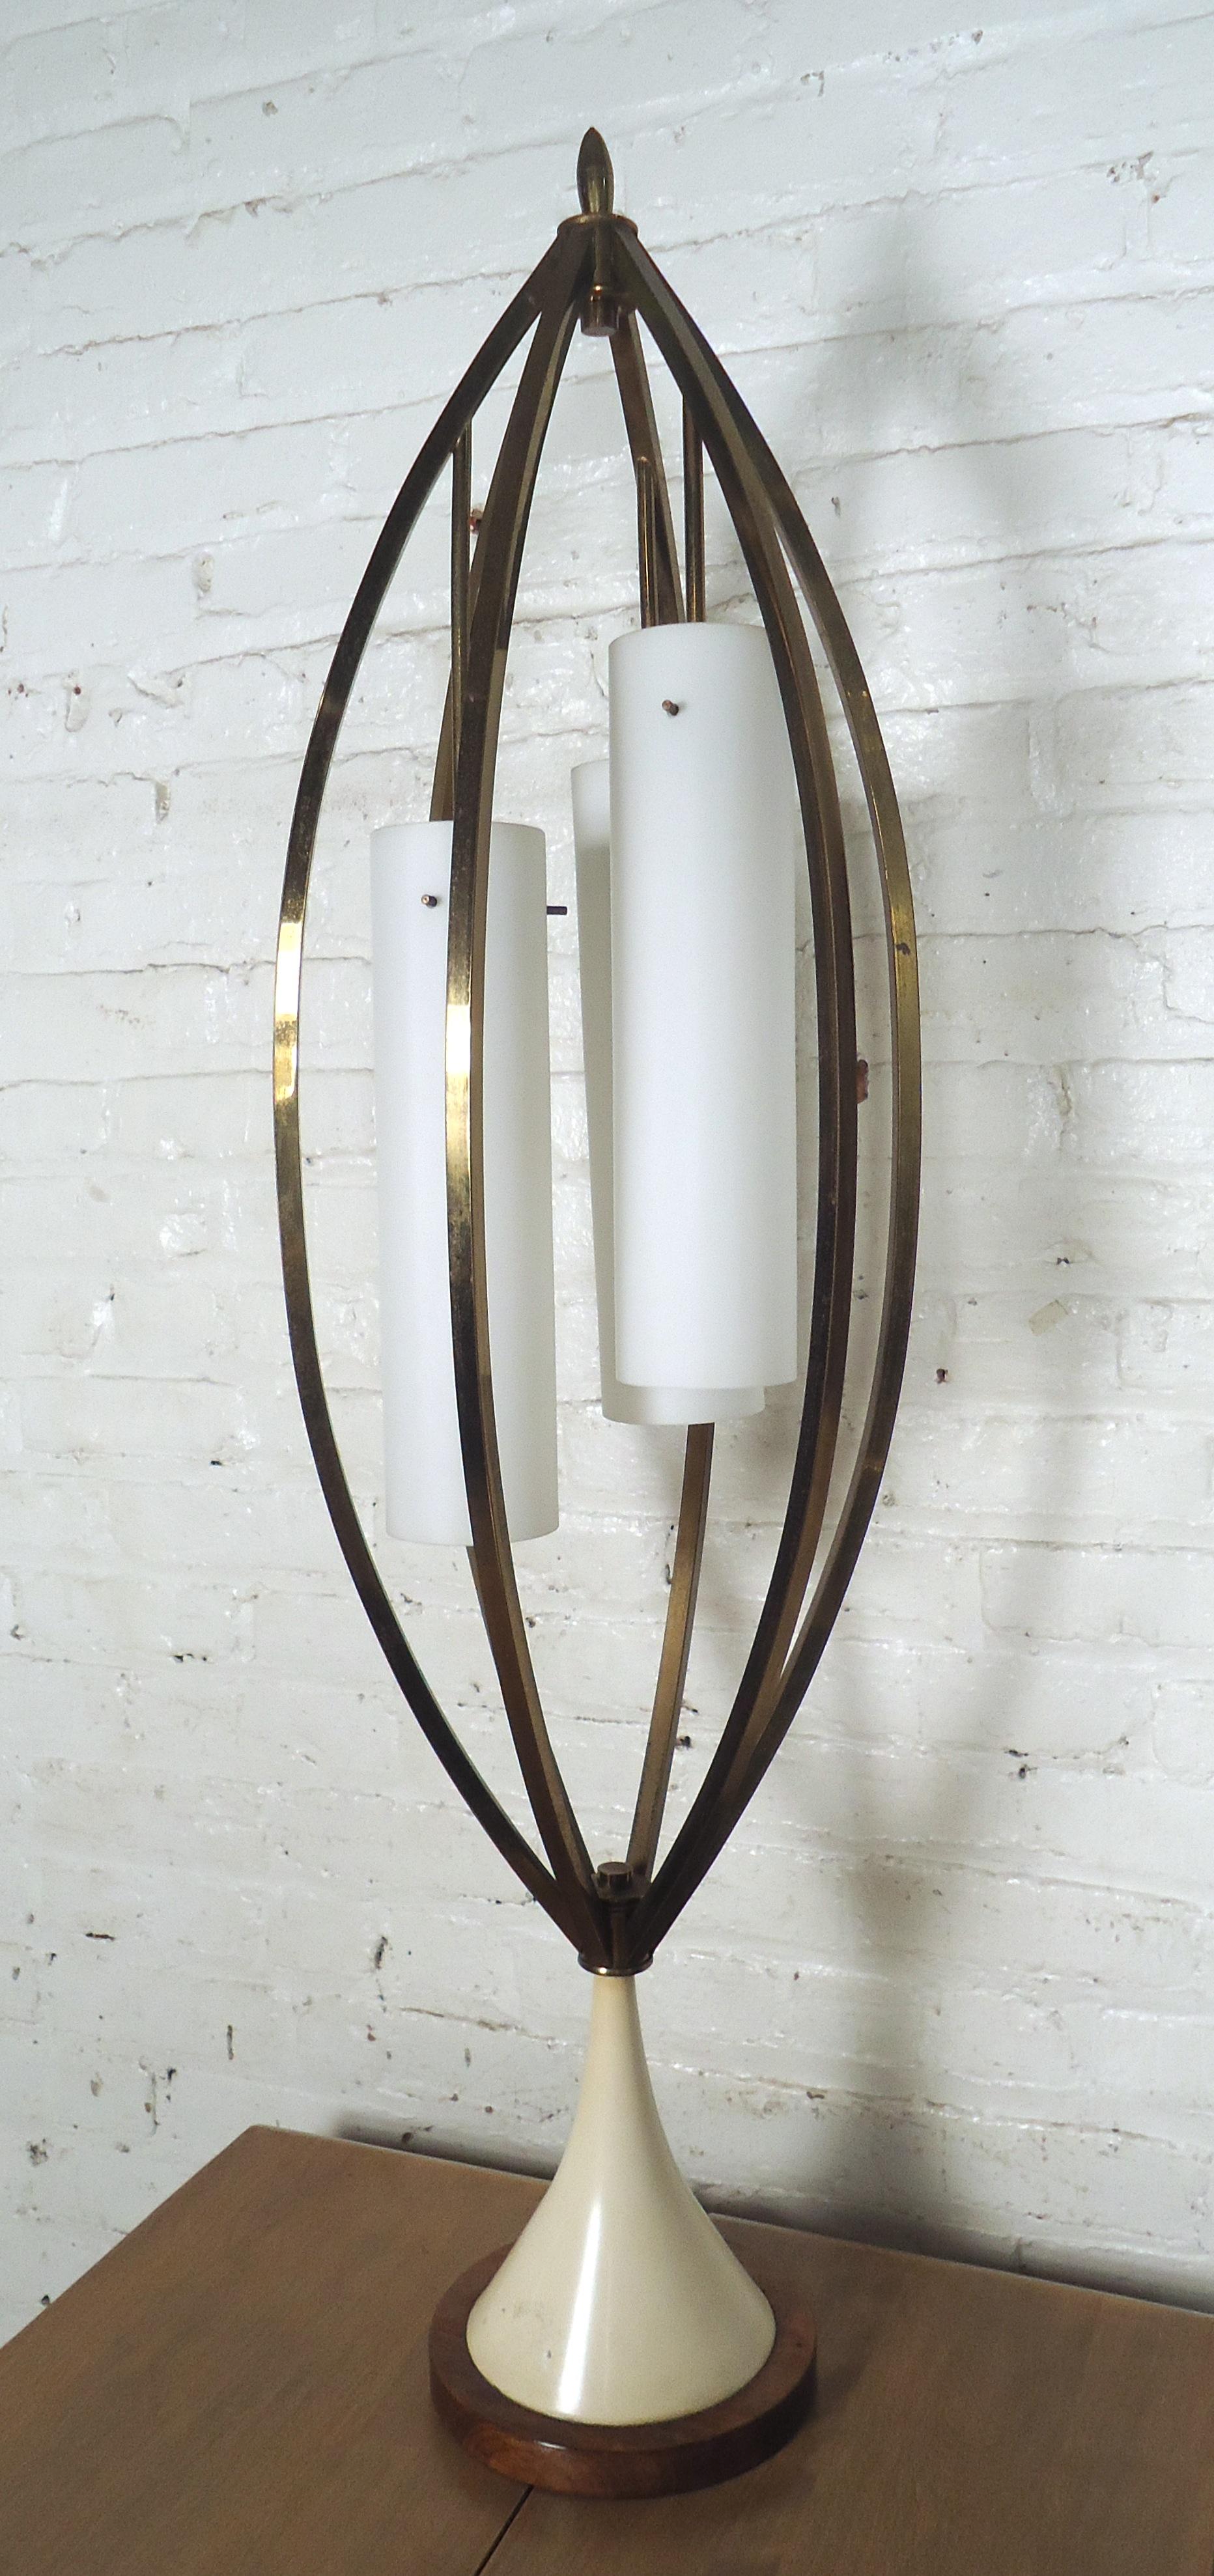 Mid-Century Modern brass table lamp features three white glass shades, brass frame and tulip style base.
(Please confirm item location - NY or NJ - with dealer).